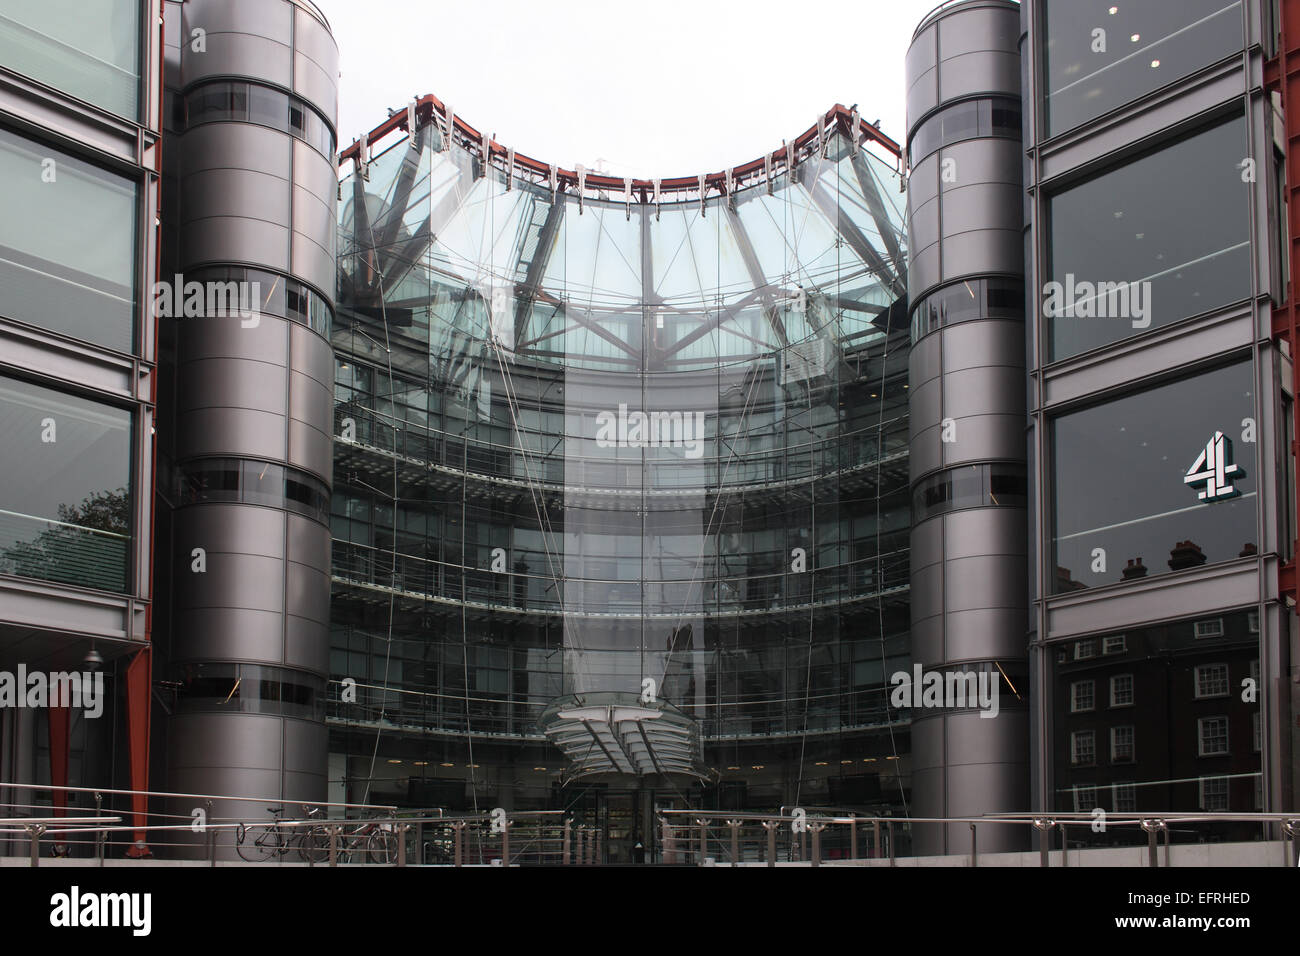 Channel 4 124 Horseferry London TV Building Stock Photo